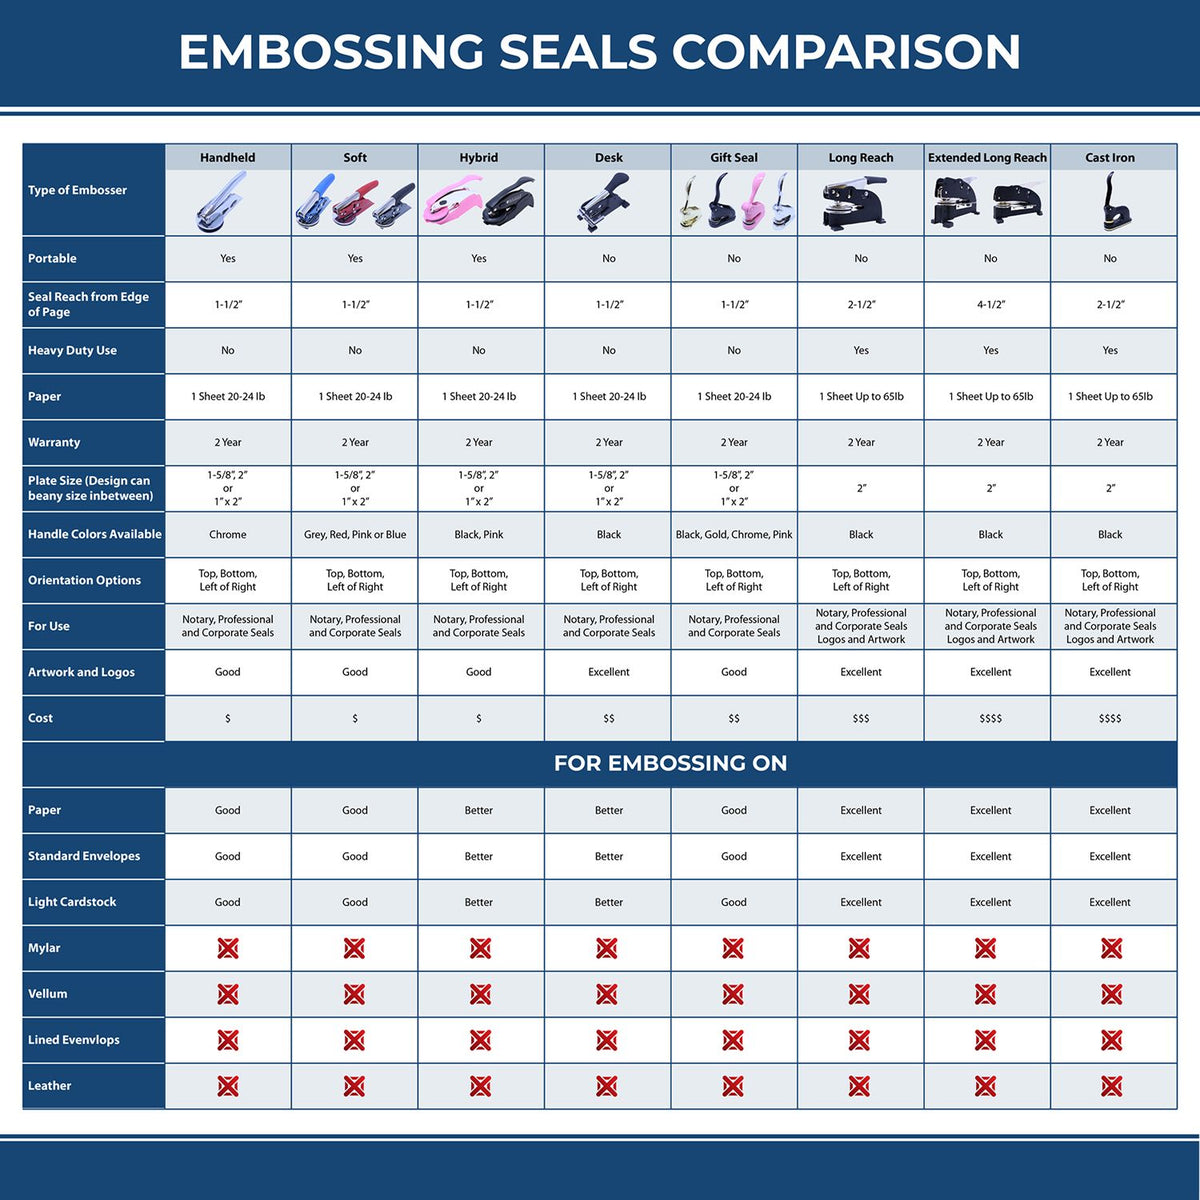 A comparison chart for the different types of mount models available for the Long Reach Utah PE Seal.